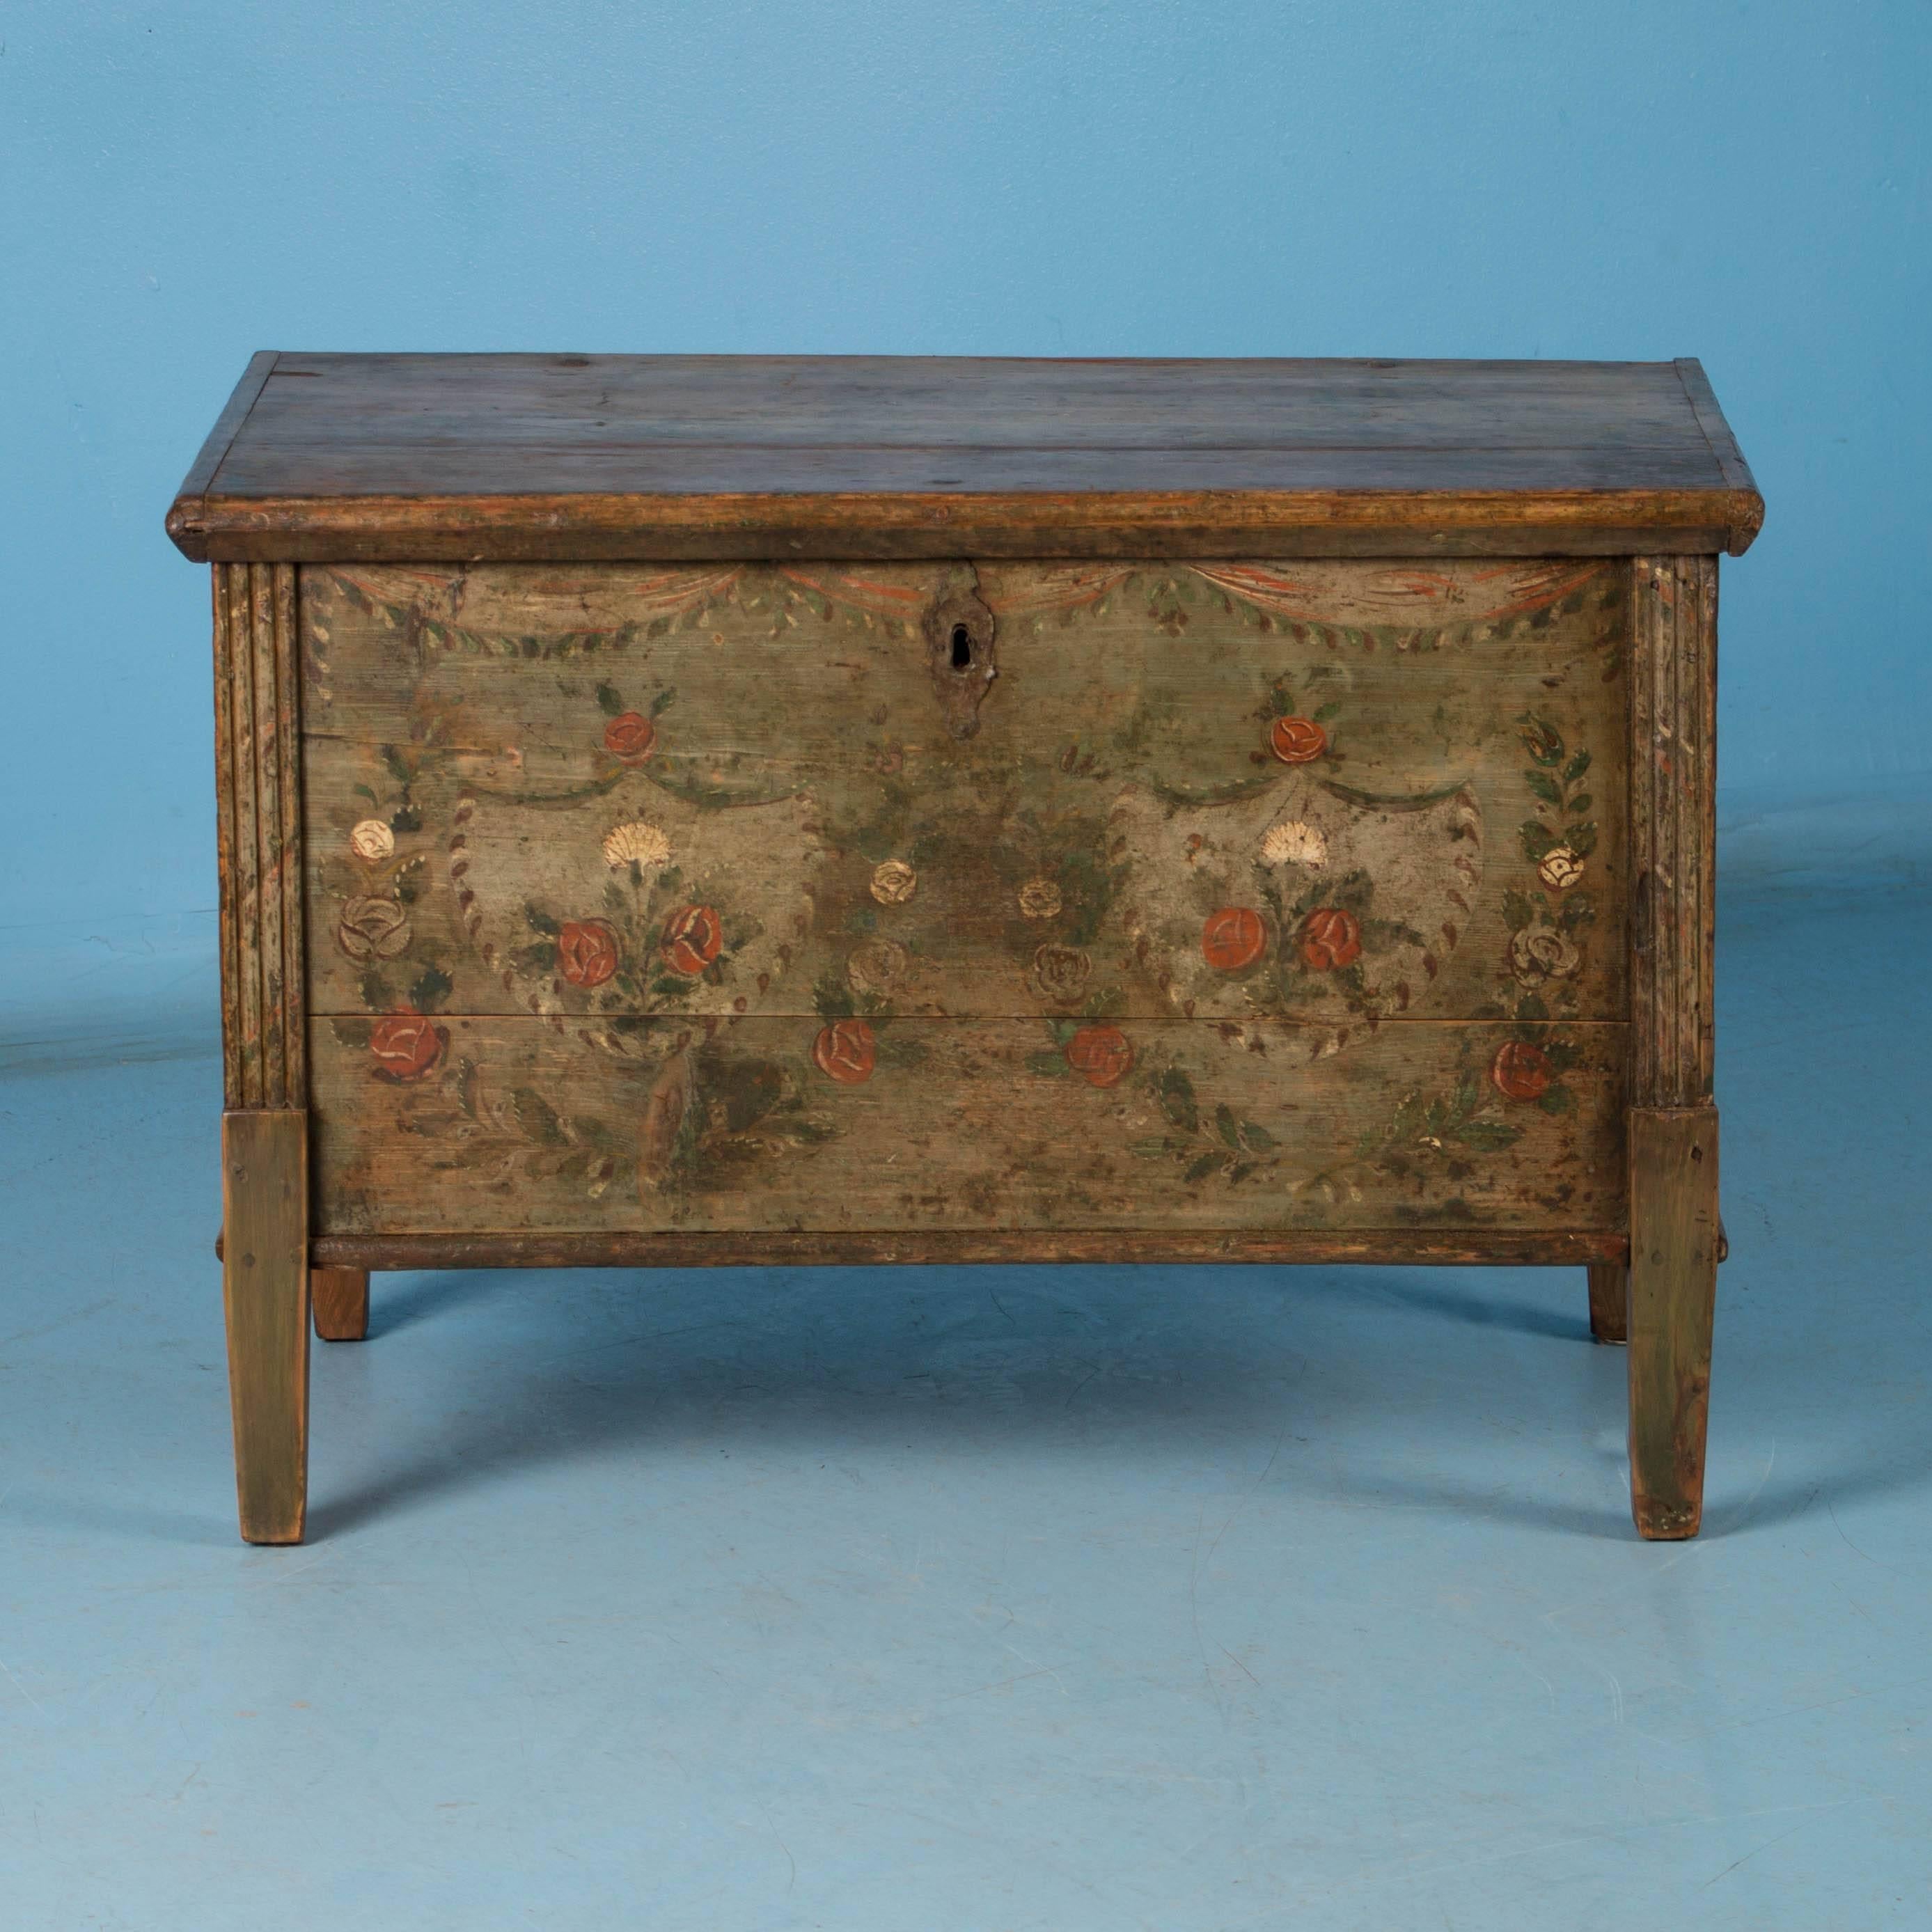 Hungarian Flat Top Green Trunk with Original Painted Floral Details, circa 1840-1860